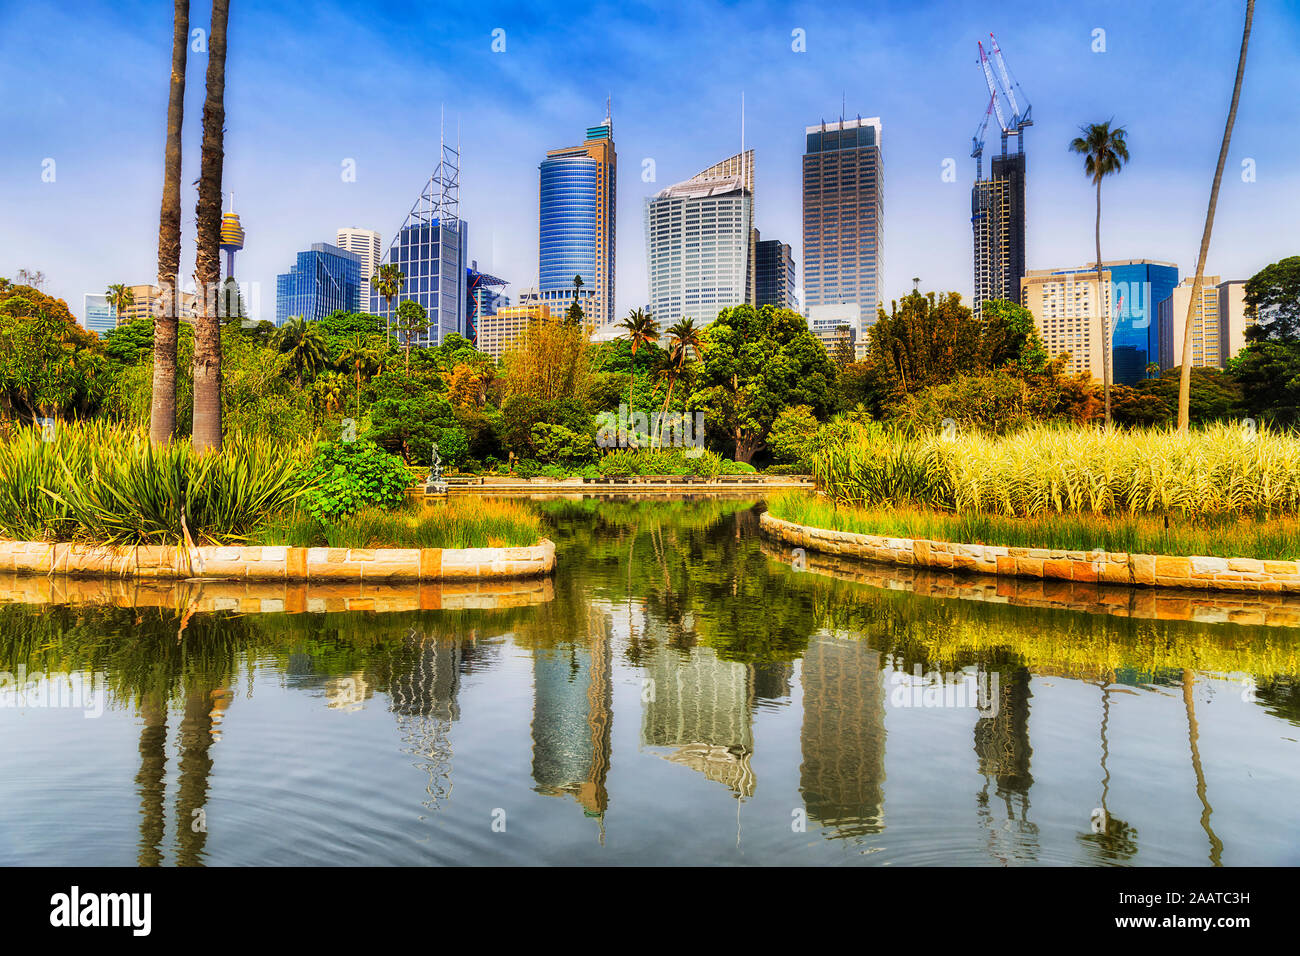 High-rise towers of Sydney city CBD above green trees and grass of Sydney Botanic Gardens reflecting in waters of water pond under blue sky. Stock Photo